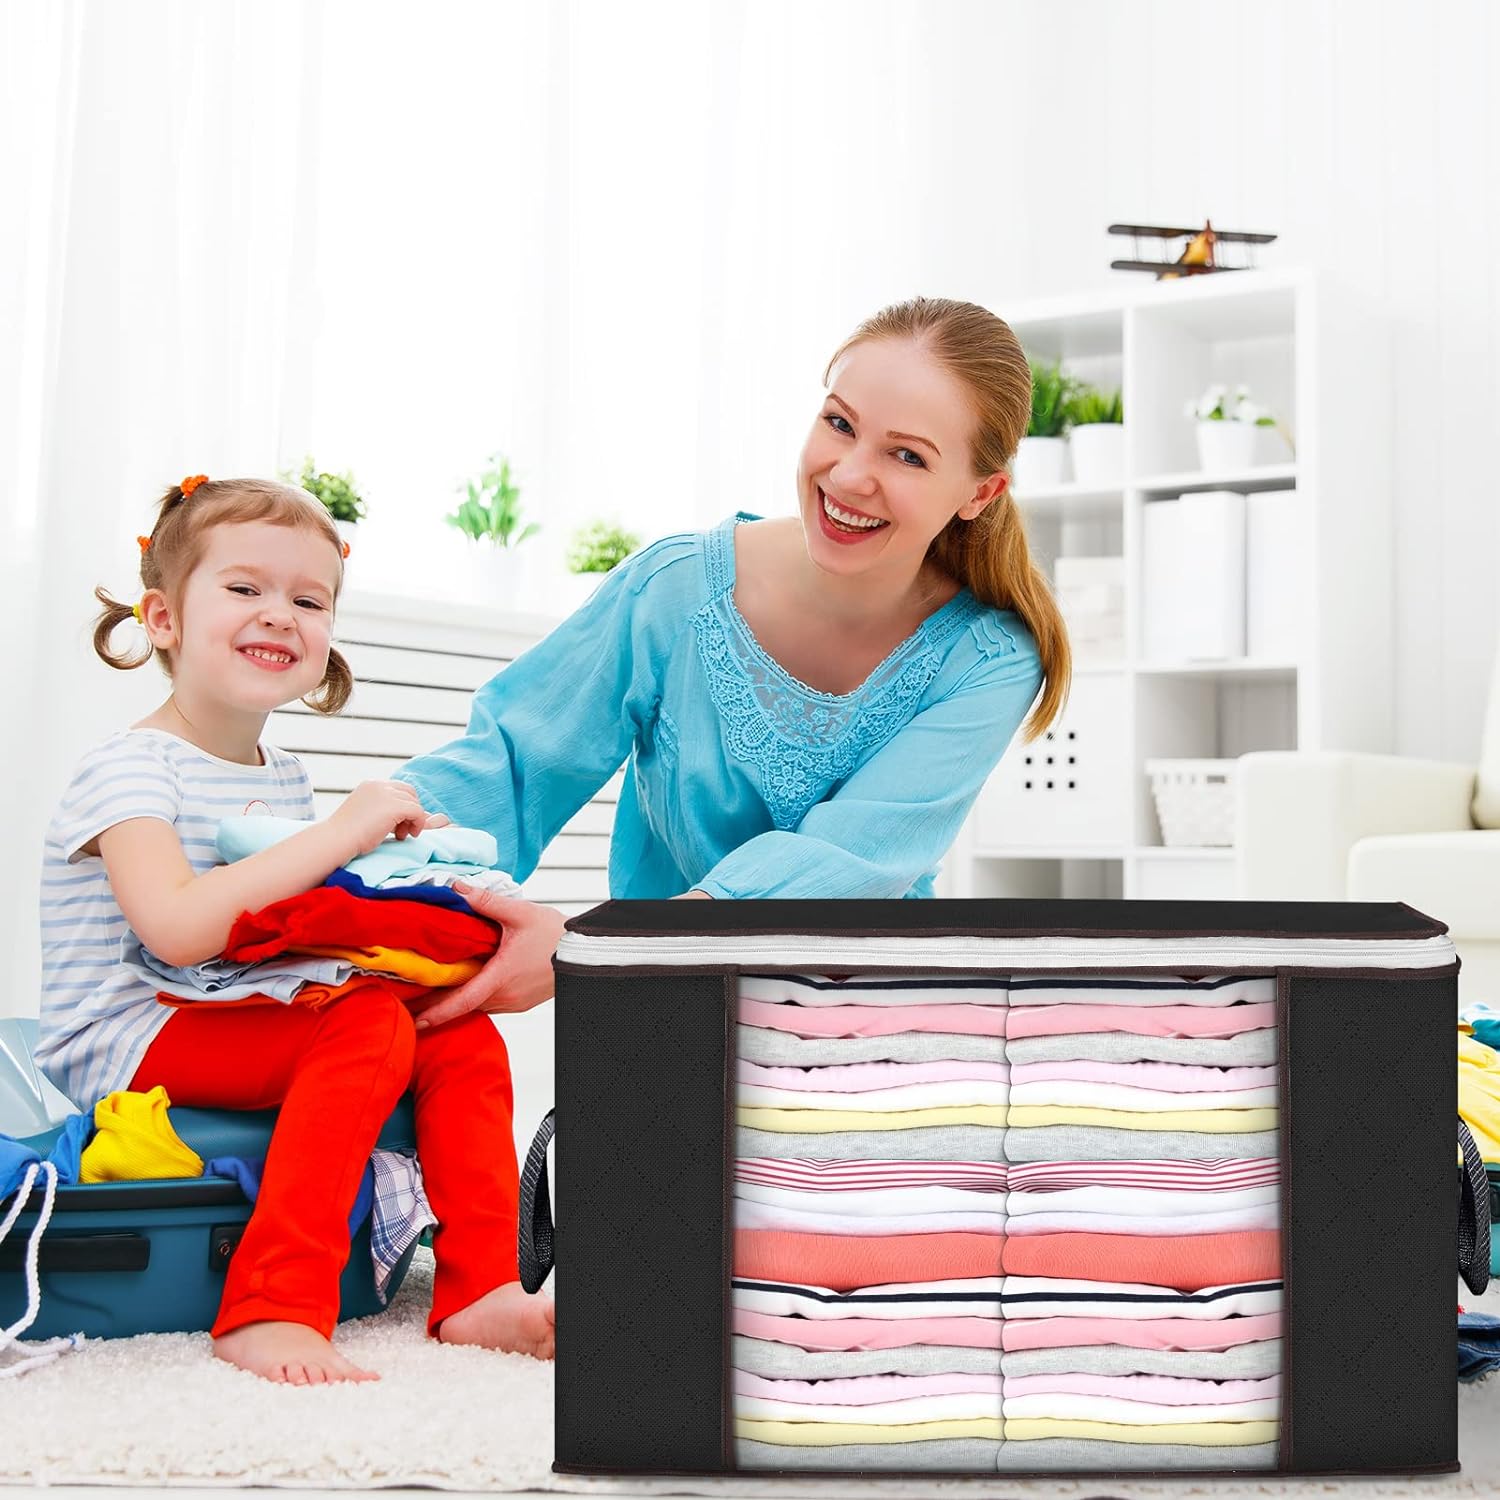 A woman and a child are smiling while sorting colorful clothes near a black storage organizer with neatly folded linens.